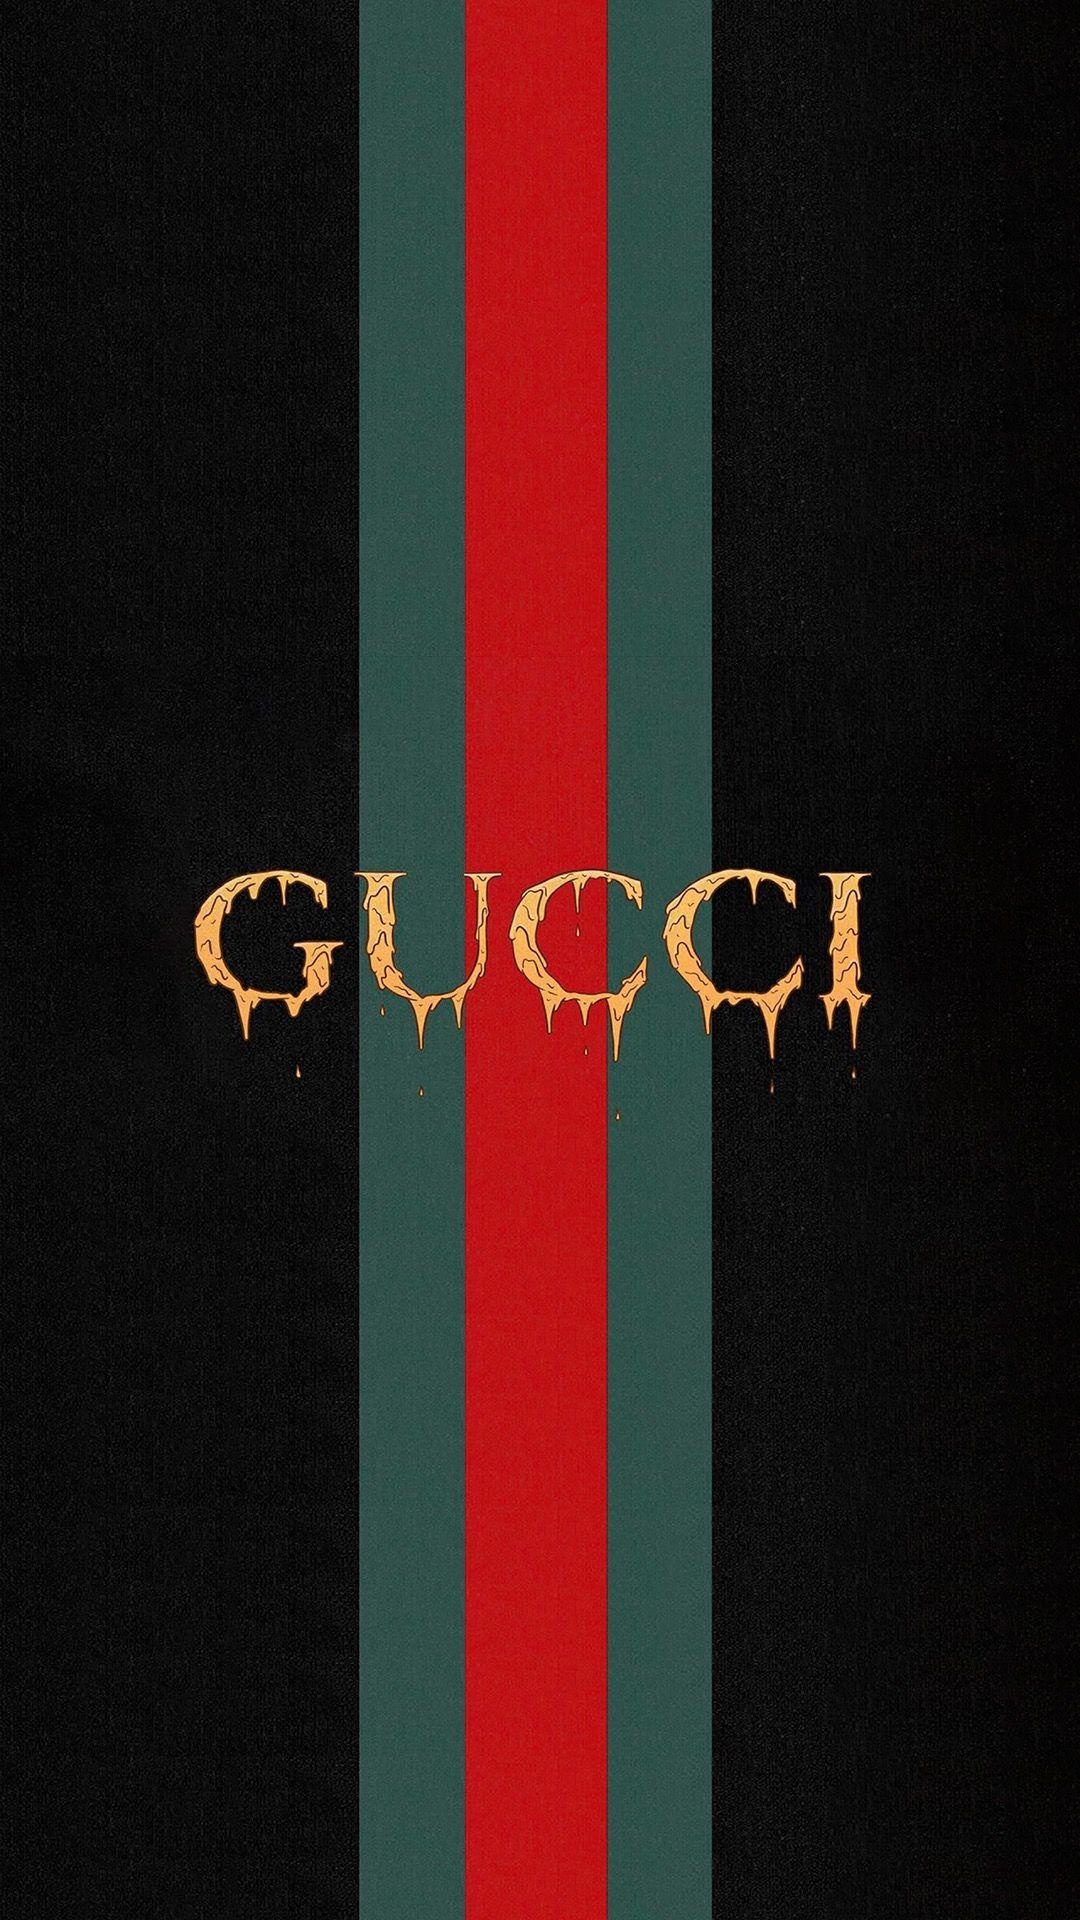 Gucci: Gucci's branding, The red and green stripe, The symbol of the company's pride from its roots. 1080x1920 Full HD Background.